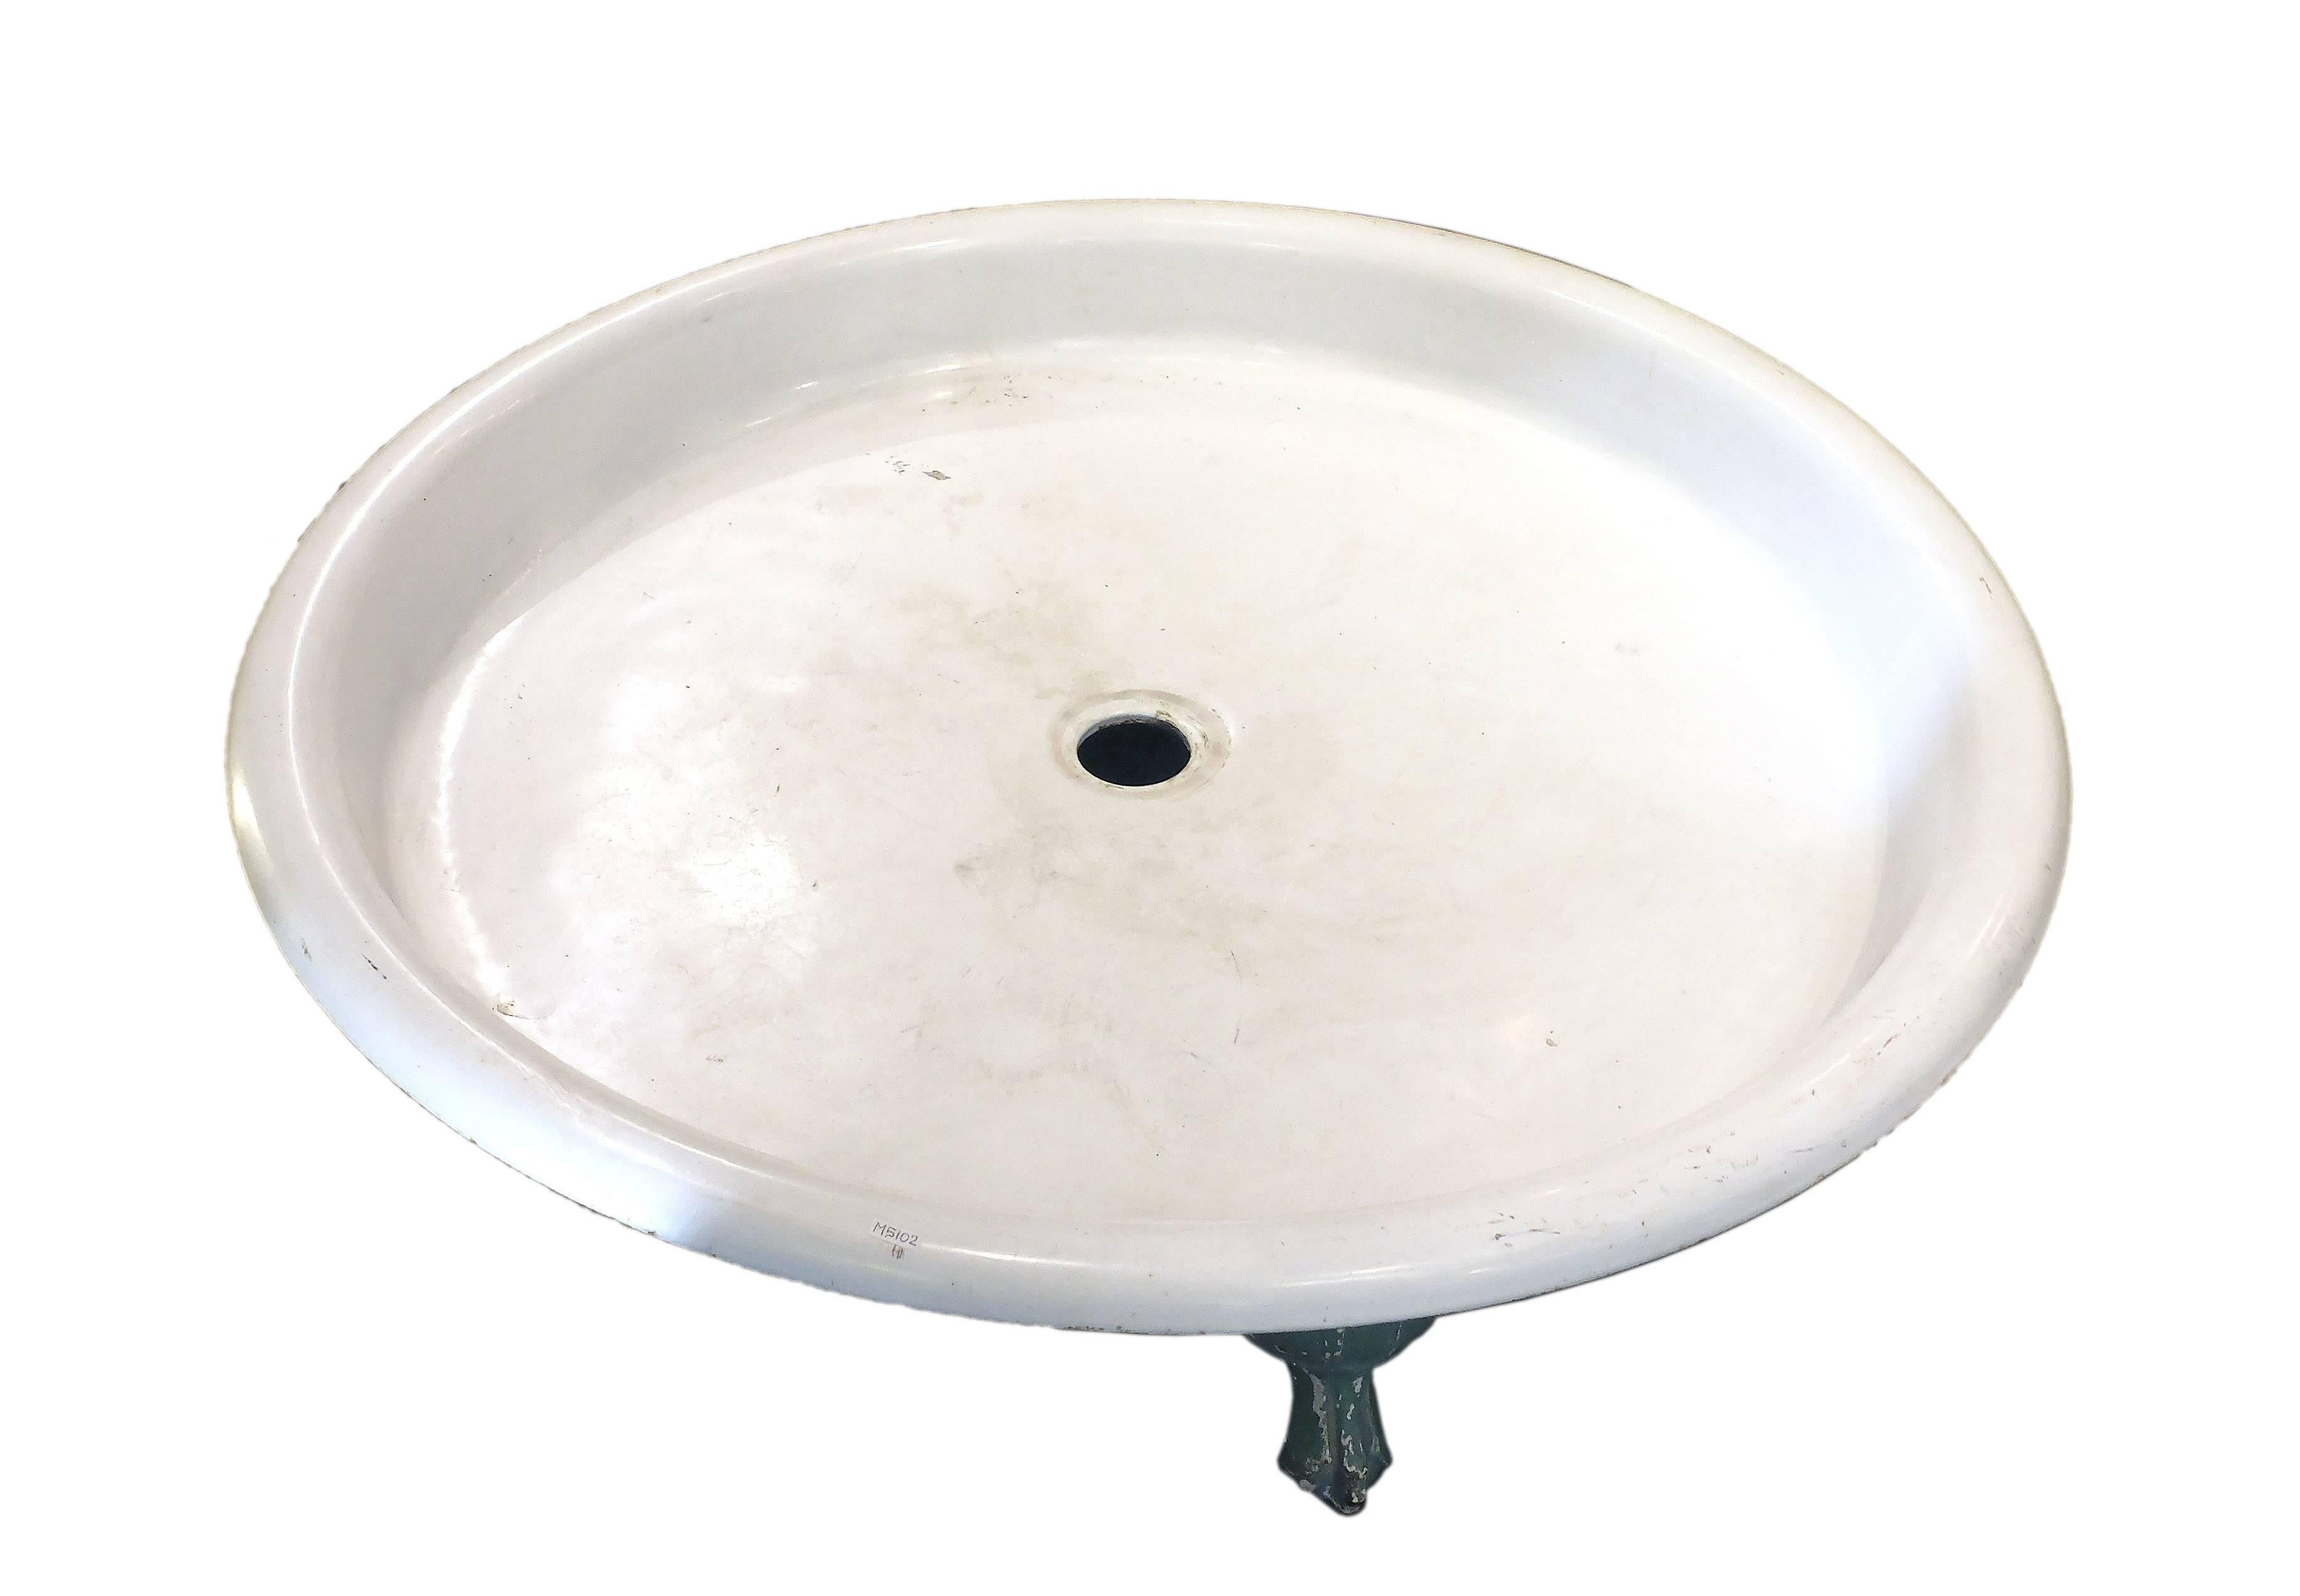 A beautiful and unusual round shaped shower tray in white cast iron with four feet in the shape of a paw. Cast iron, green painting in the front, France, circa 1900.